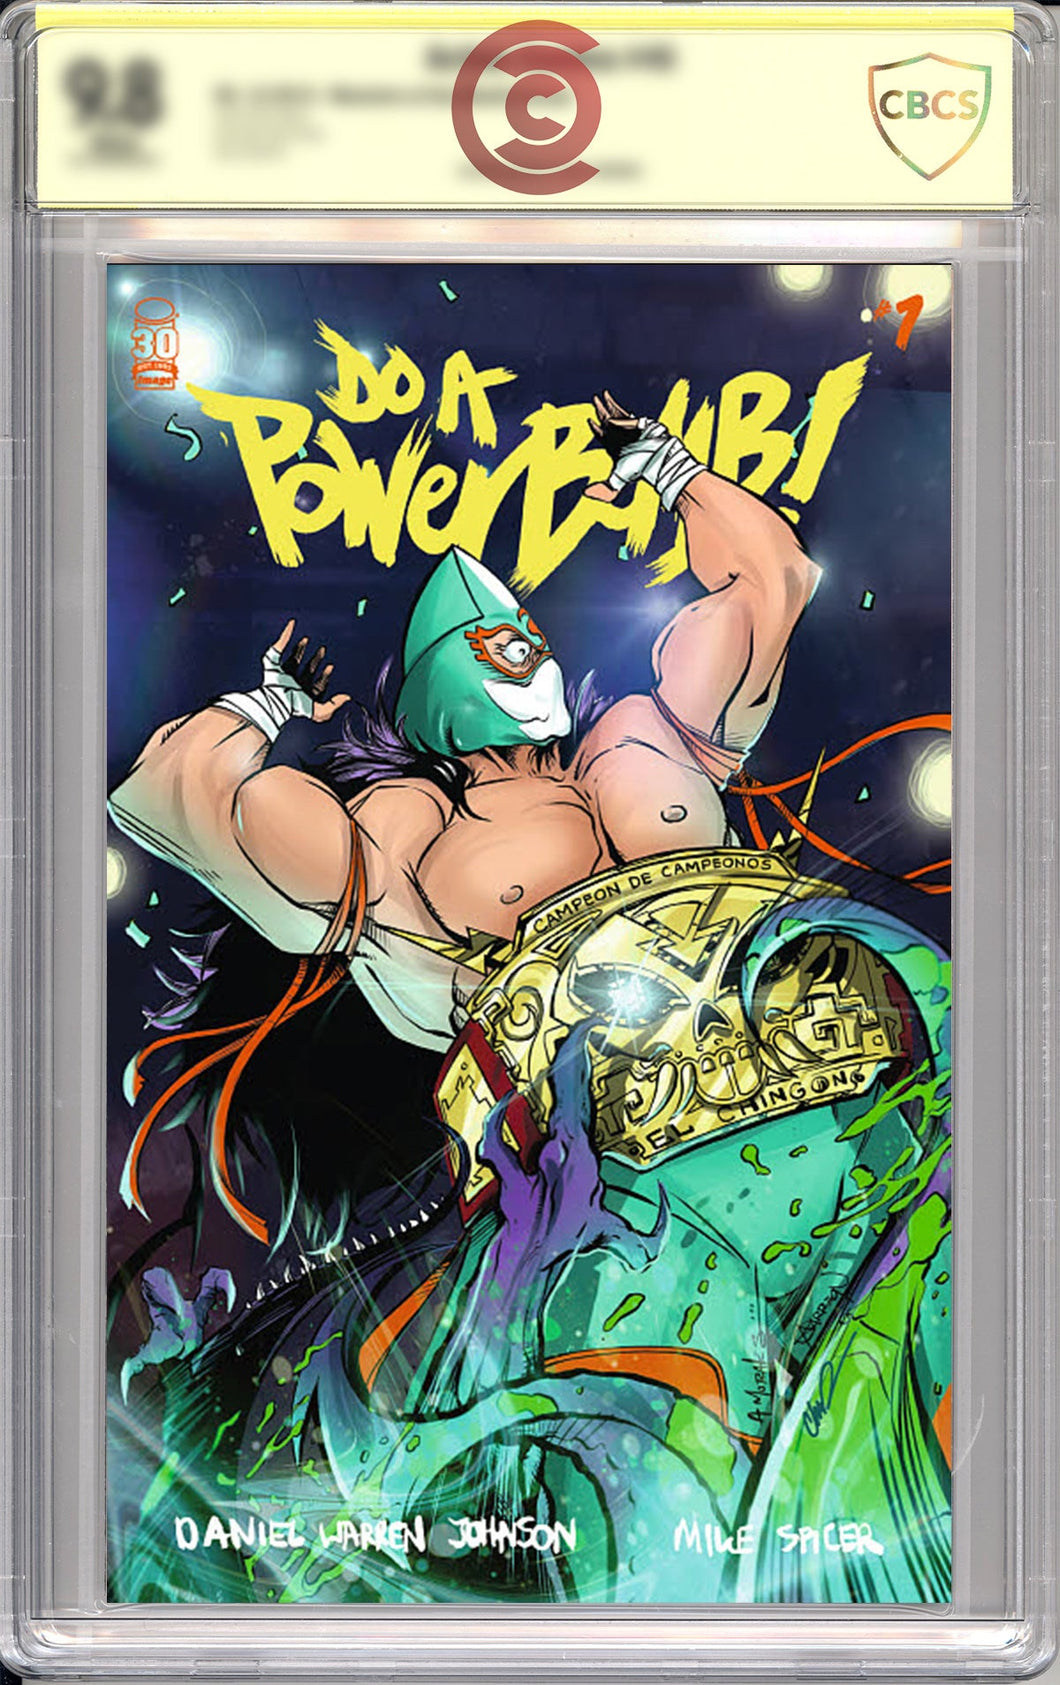 DO A POWERBOMB #1 - CCC EXCLUSIVE - TRIPLE SIGNED w/CBCS GRADING!